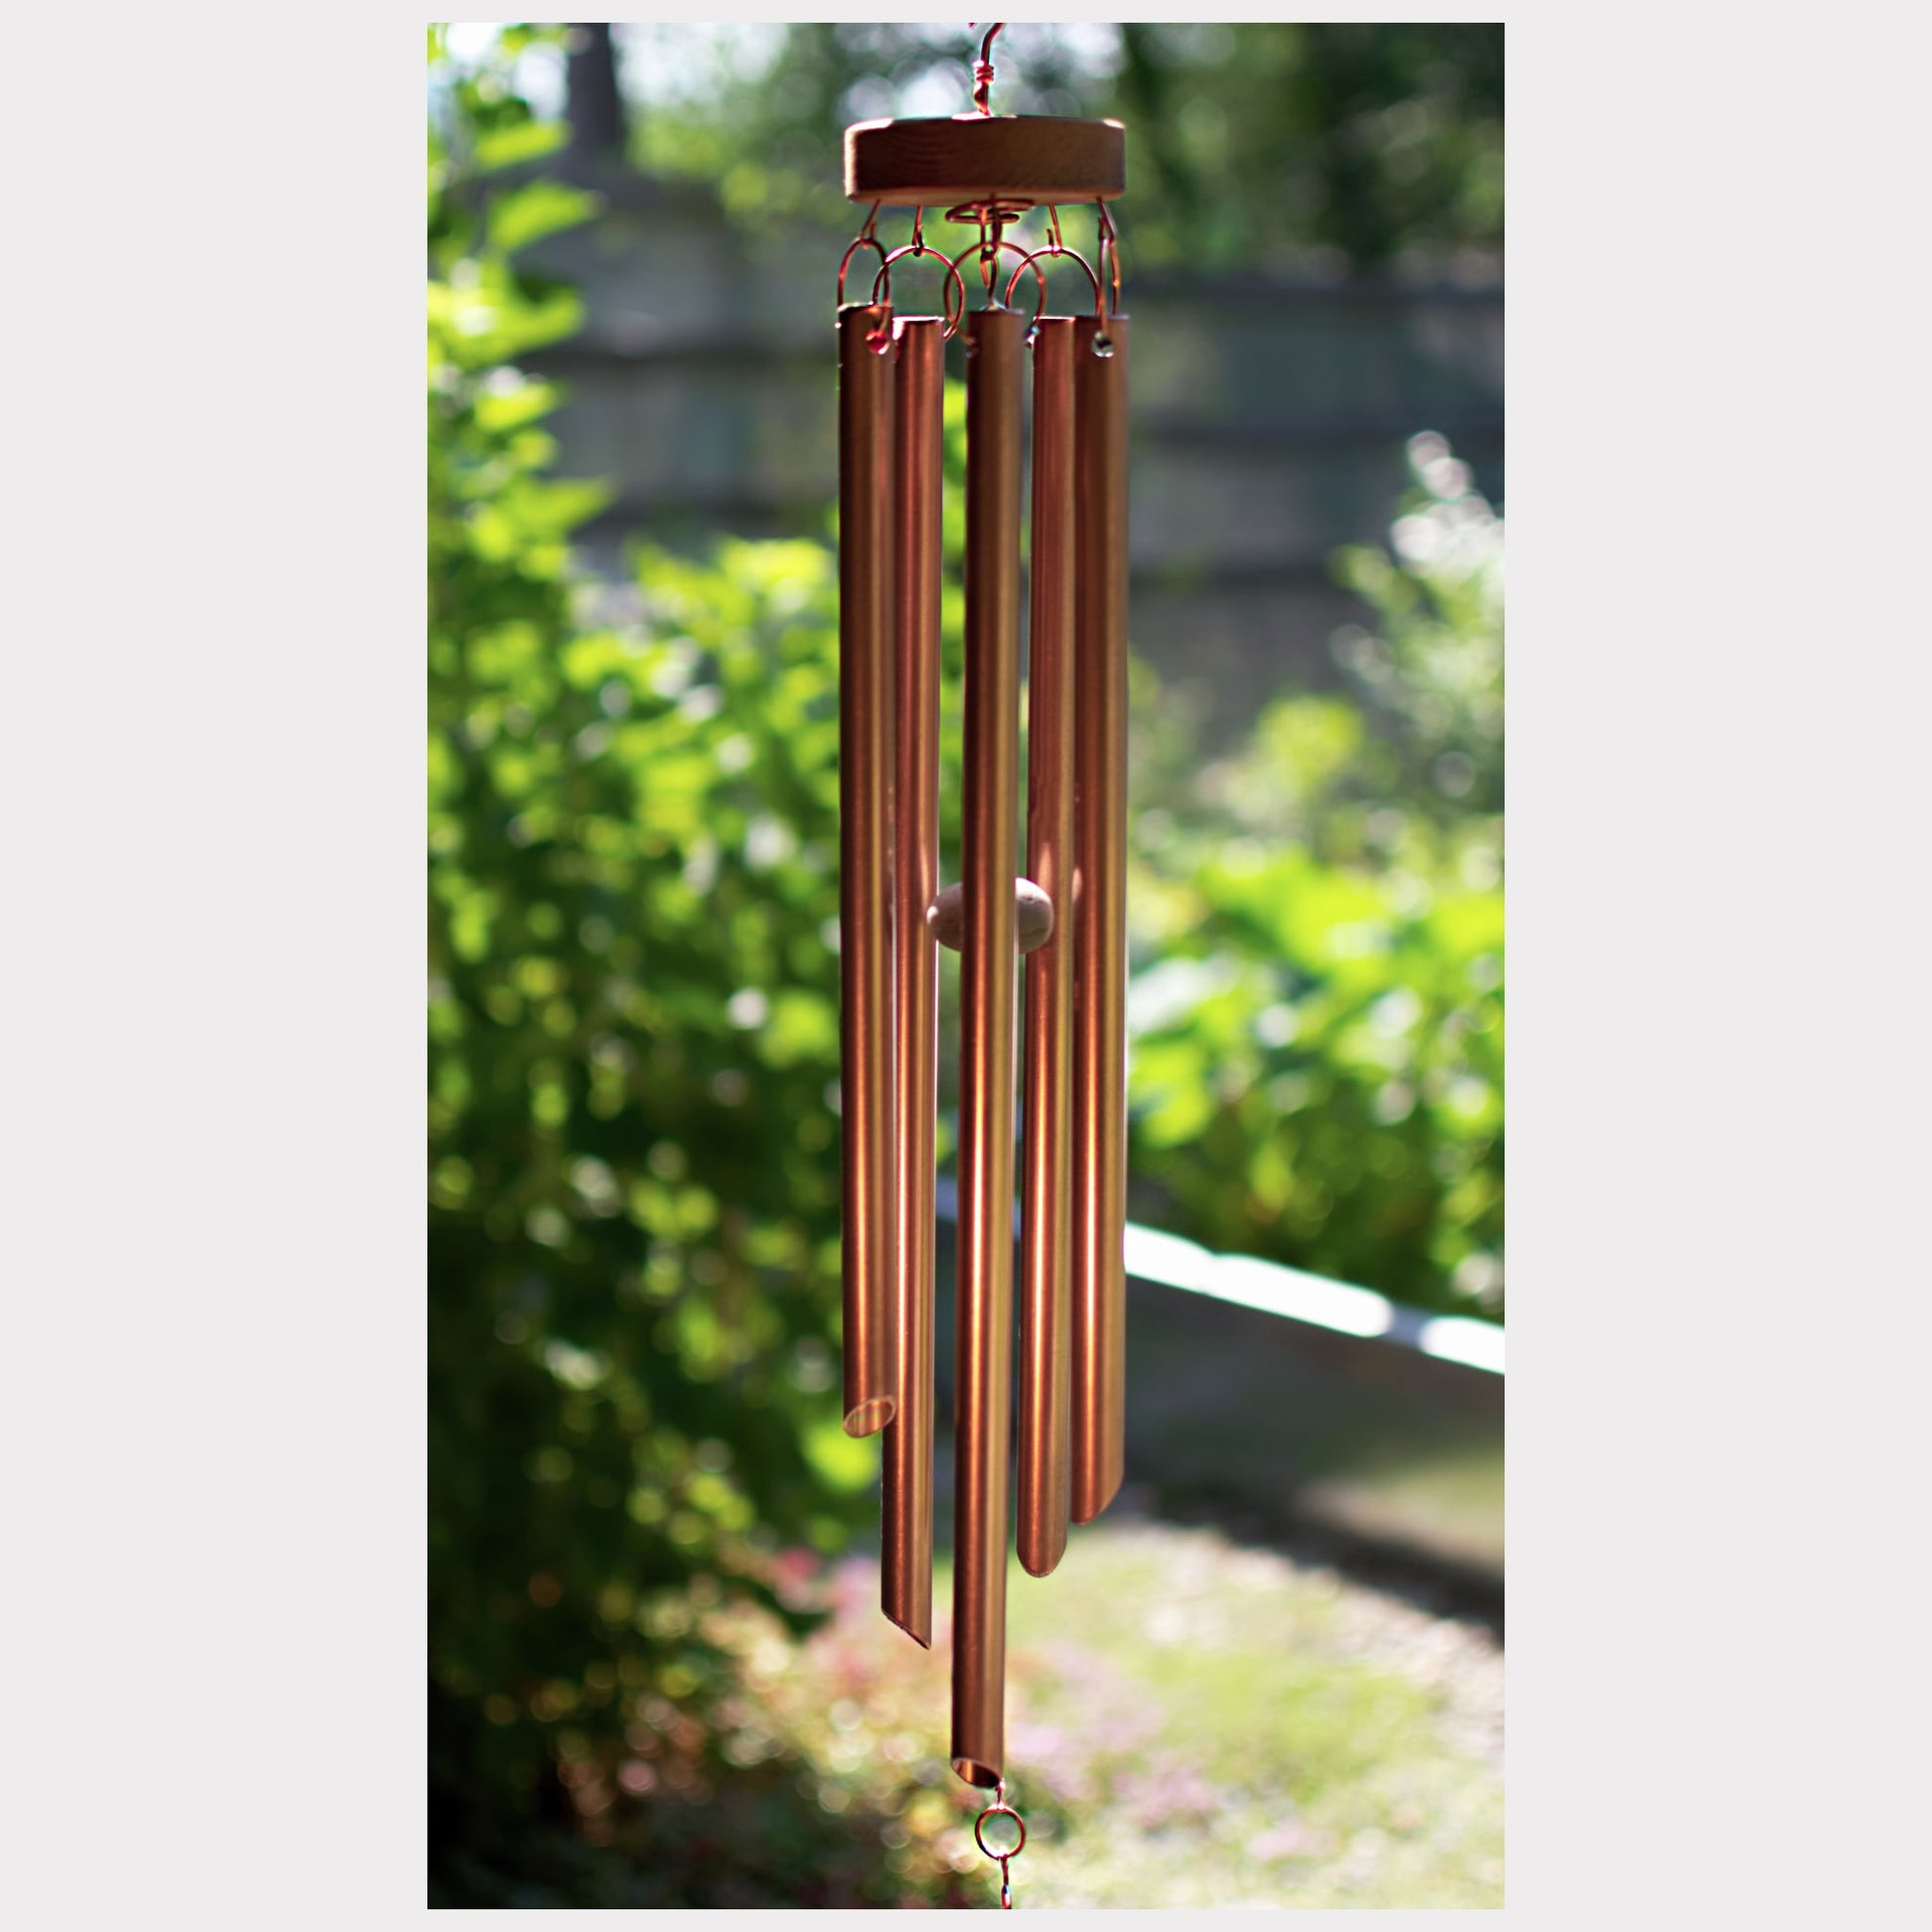 five handcrafted copper chime